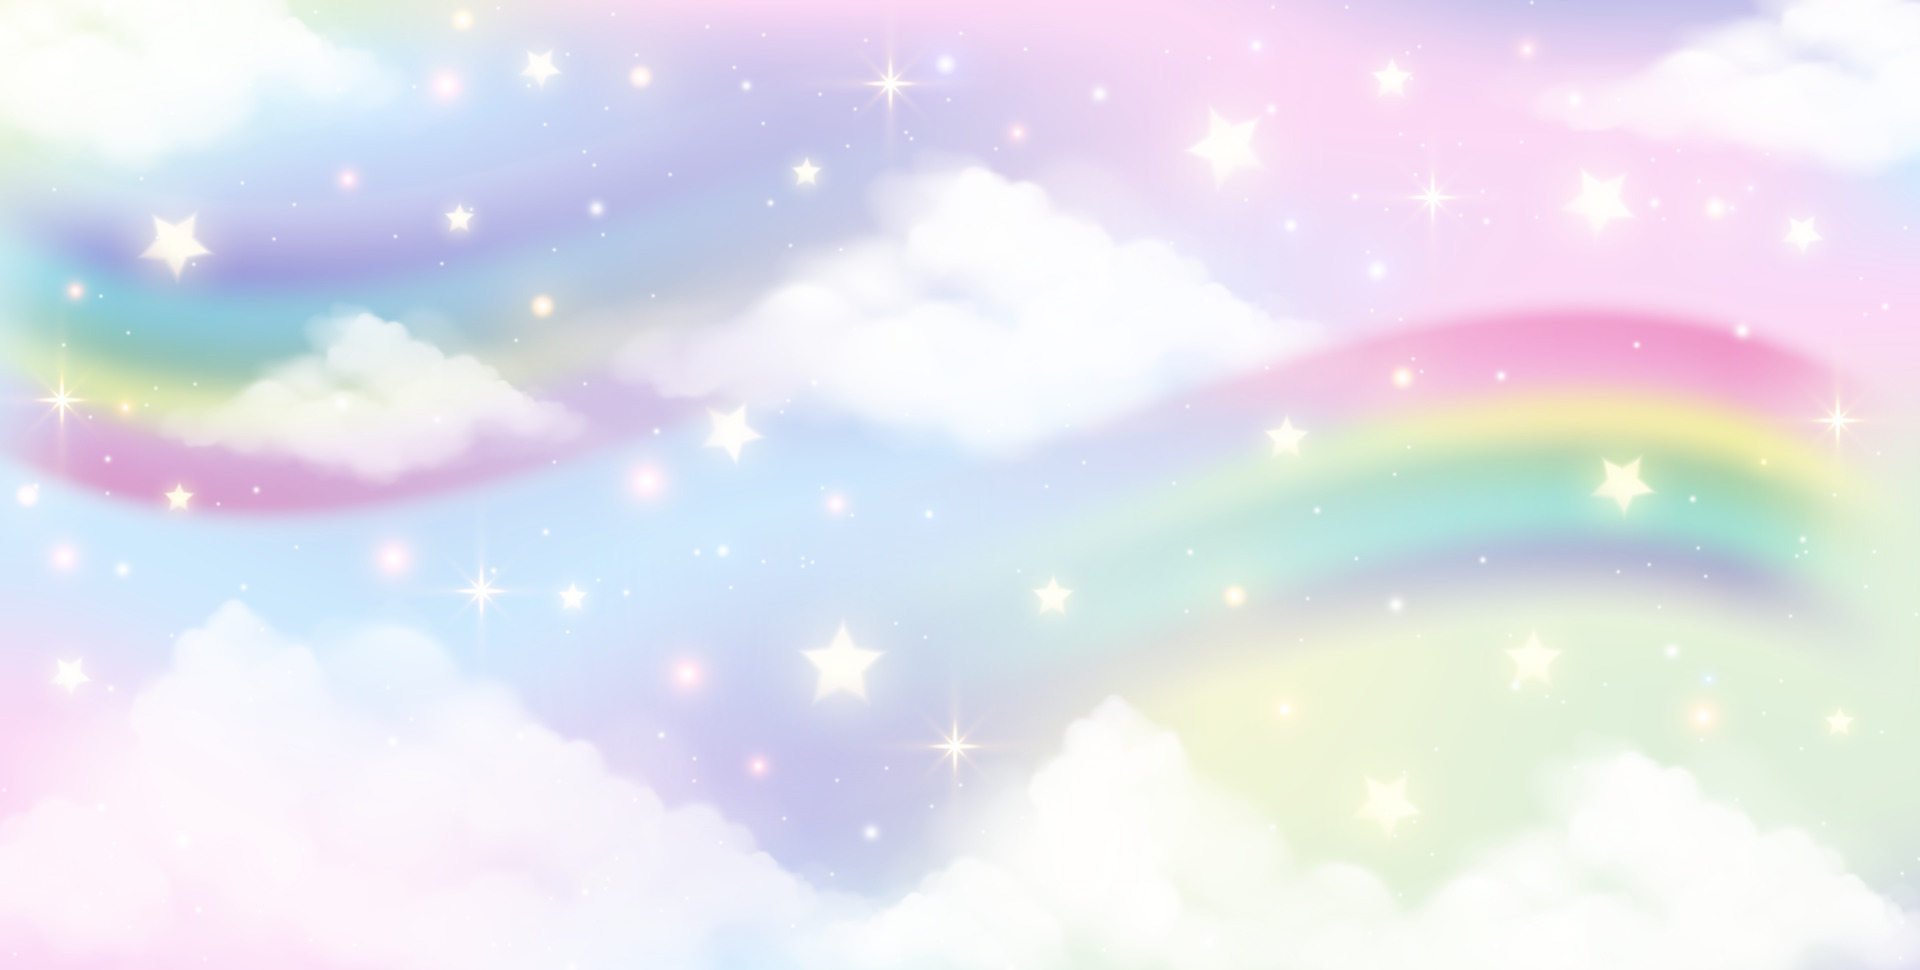 A pastel colored wallpaper with clouds and stars - Rainbows